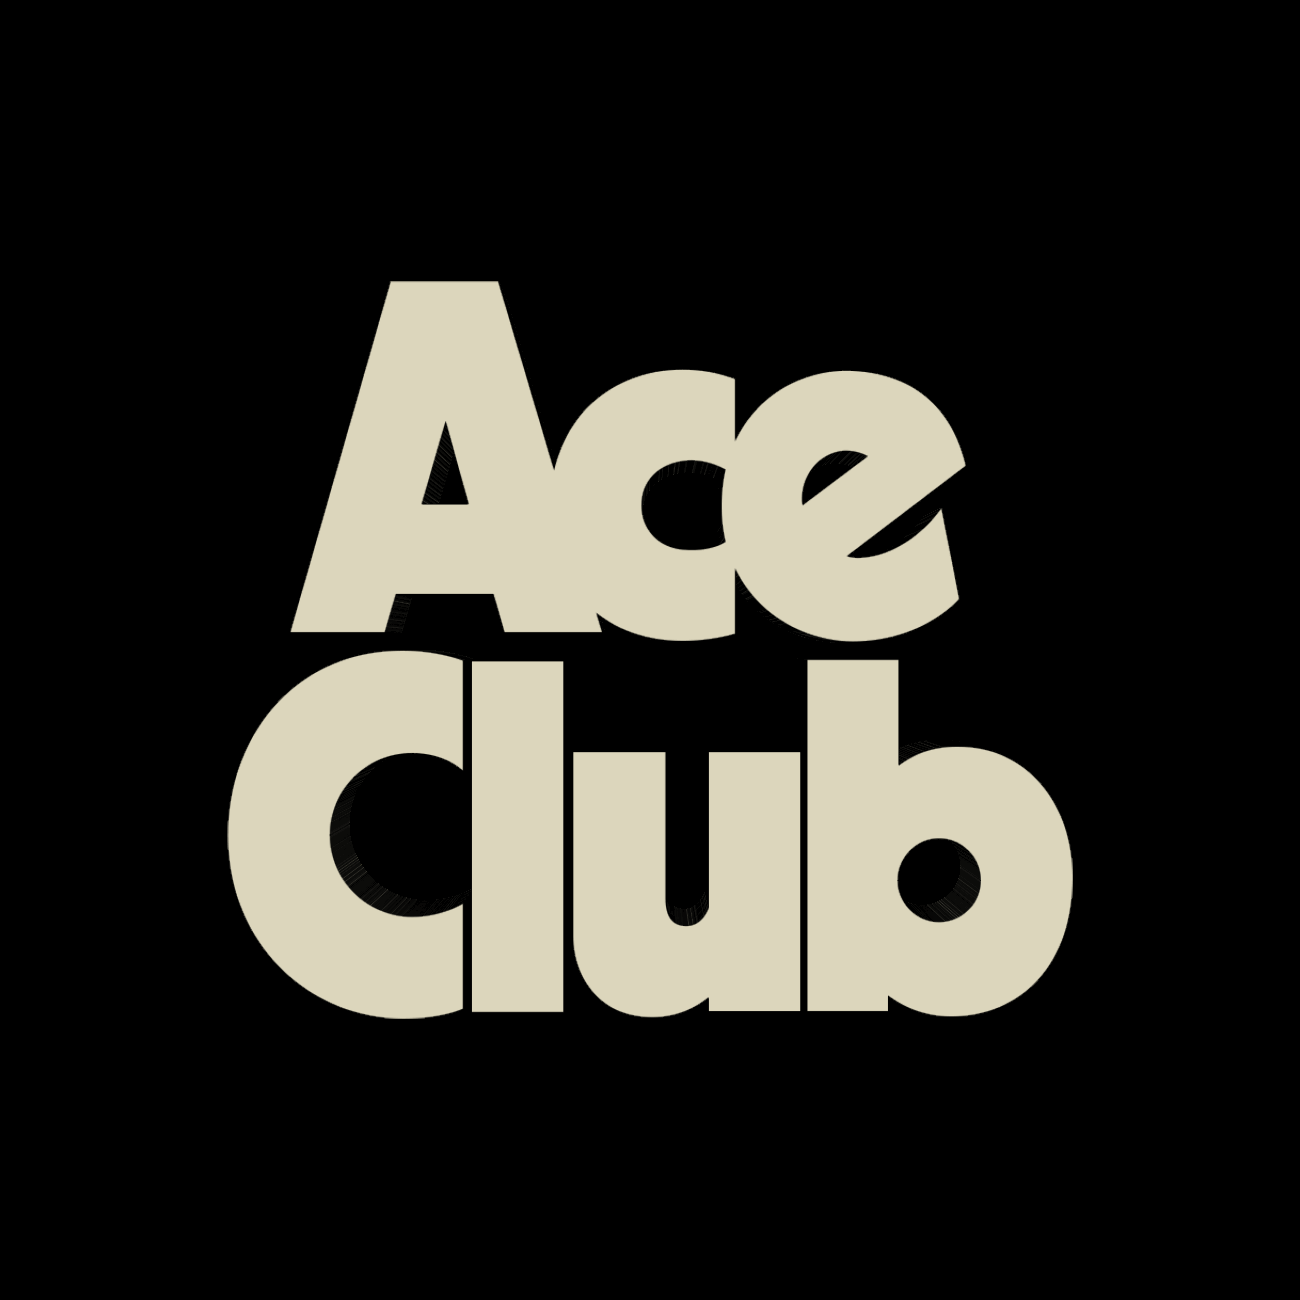 The Ace Club logo in 3D!